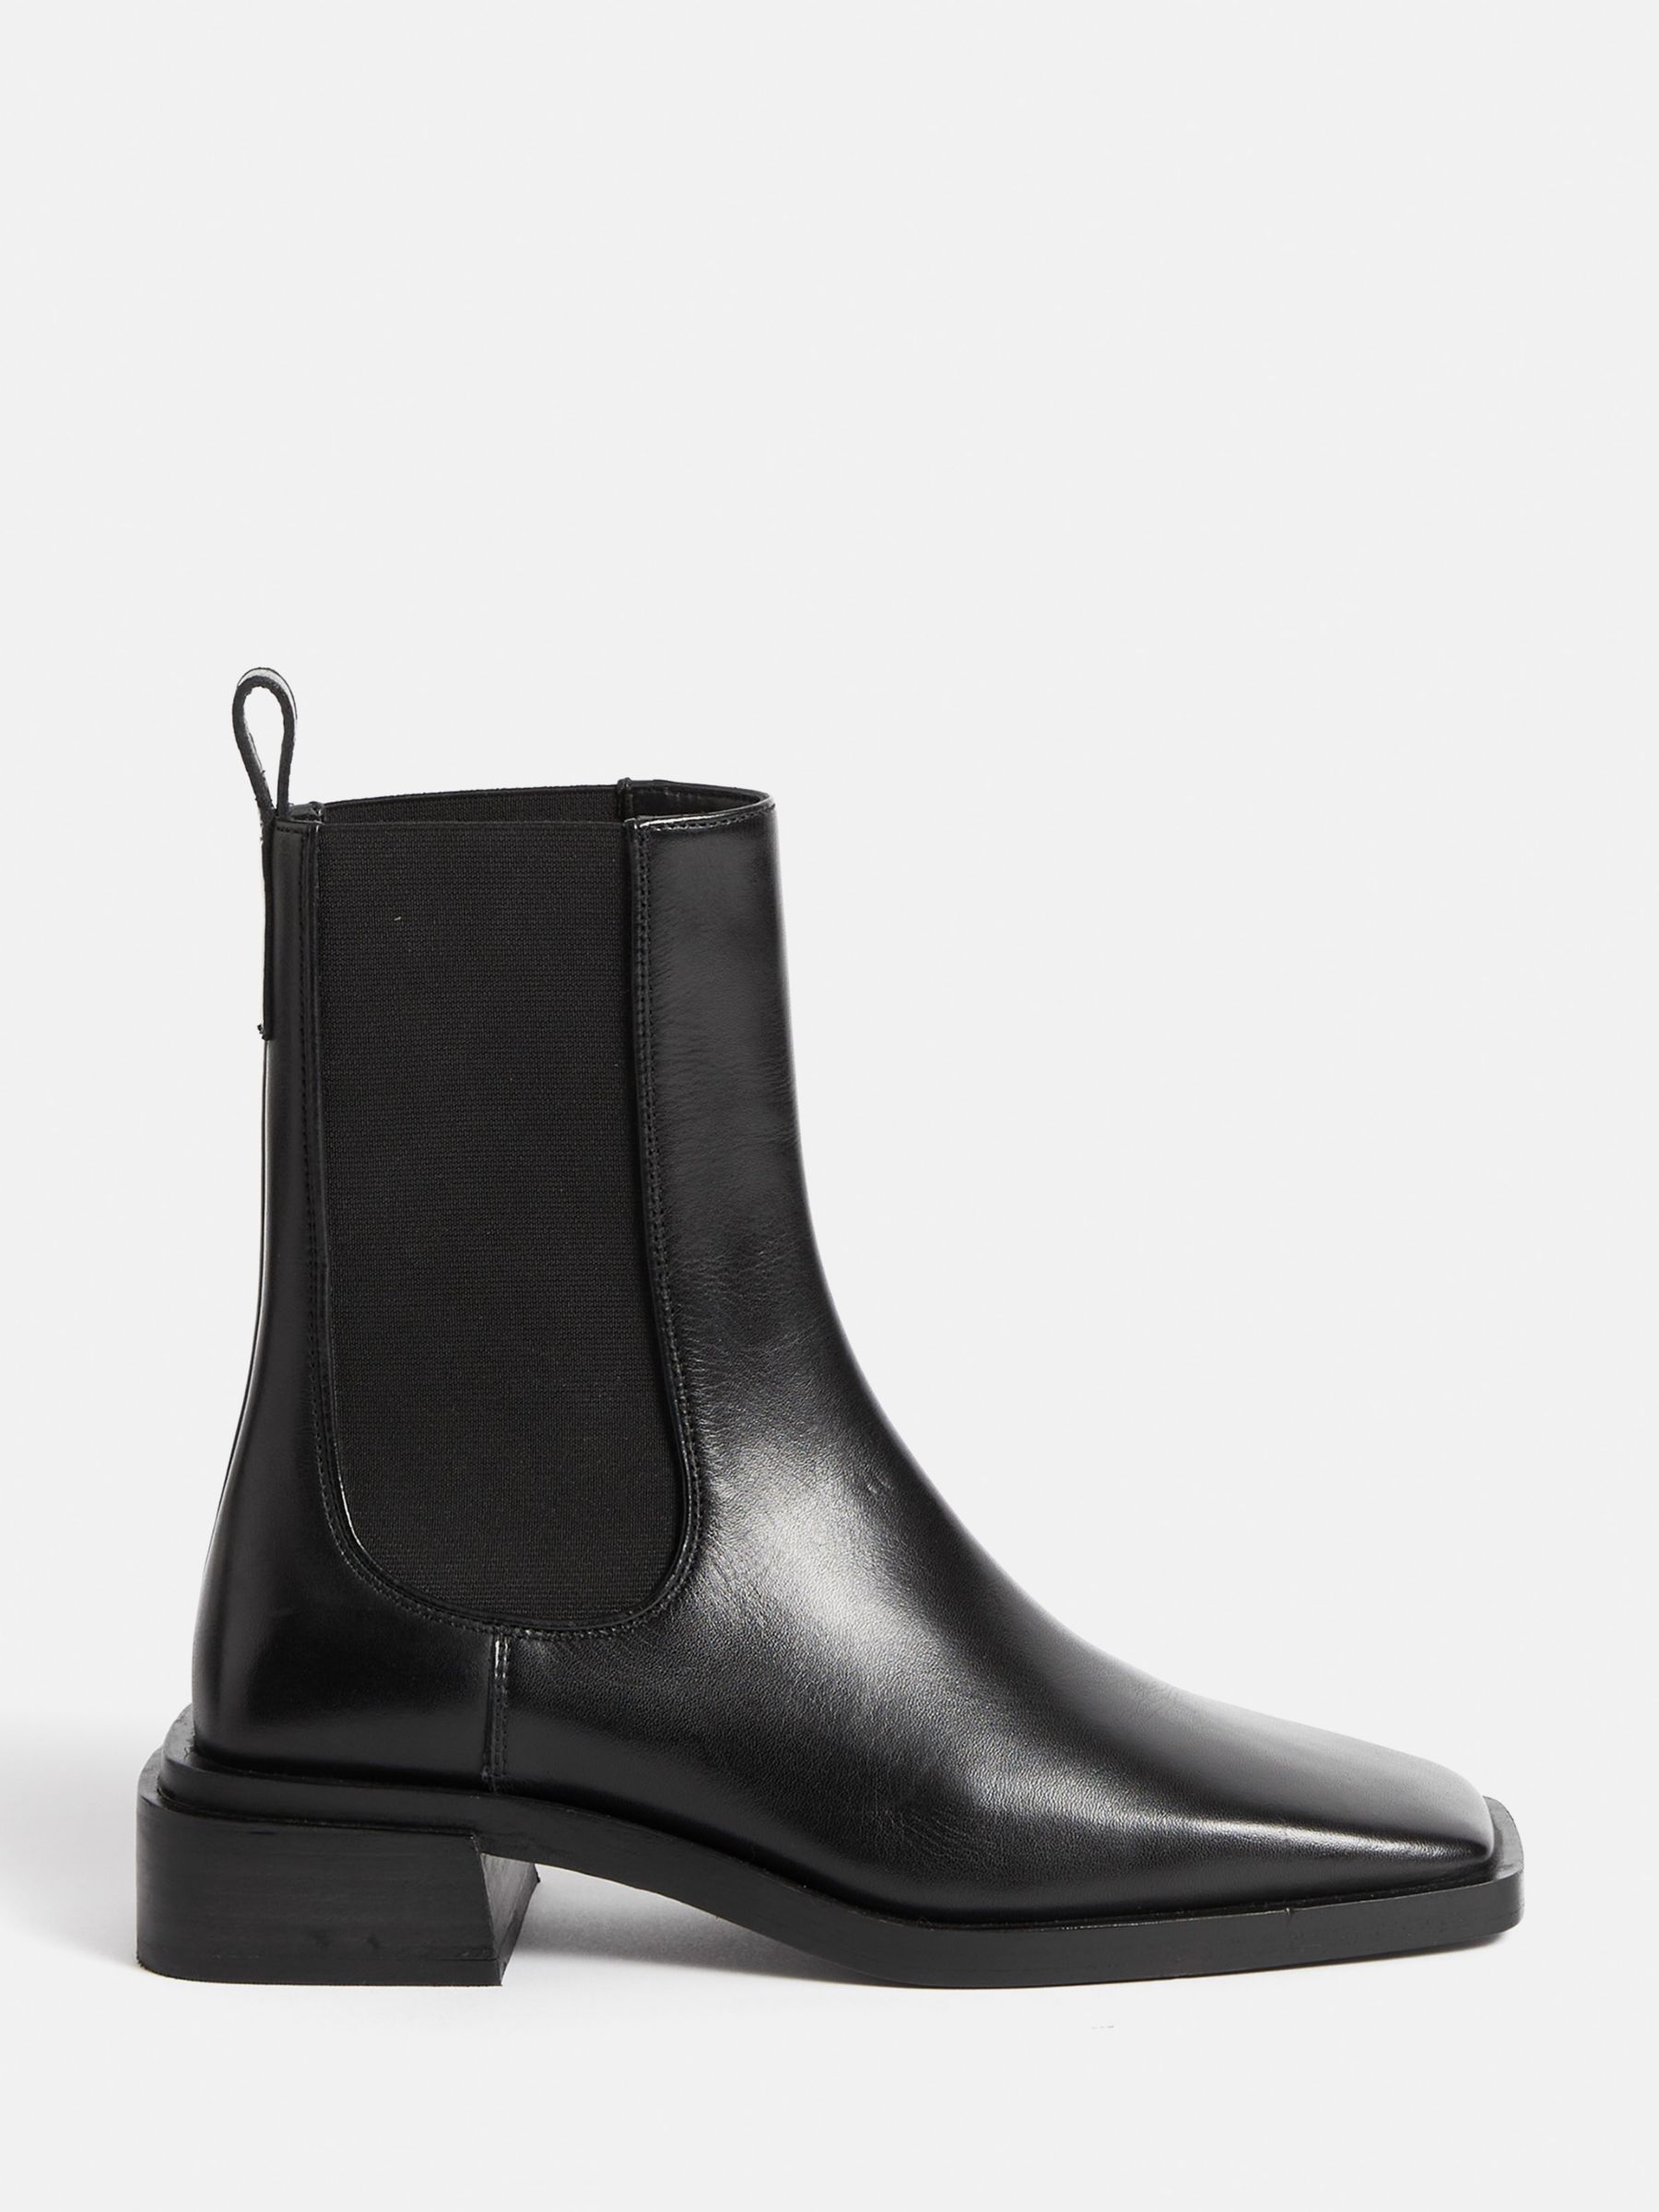 Jigsaw Kent Leather Chelsea Boots, Black at John Lewis & Partners